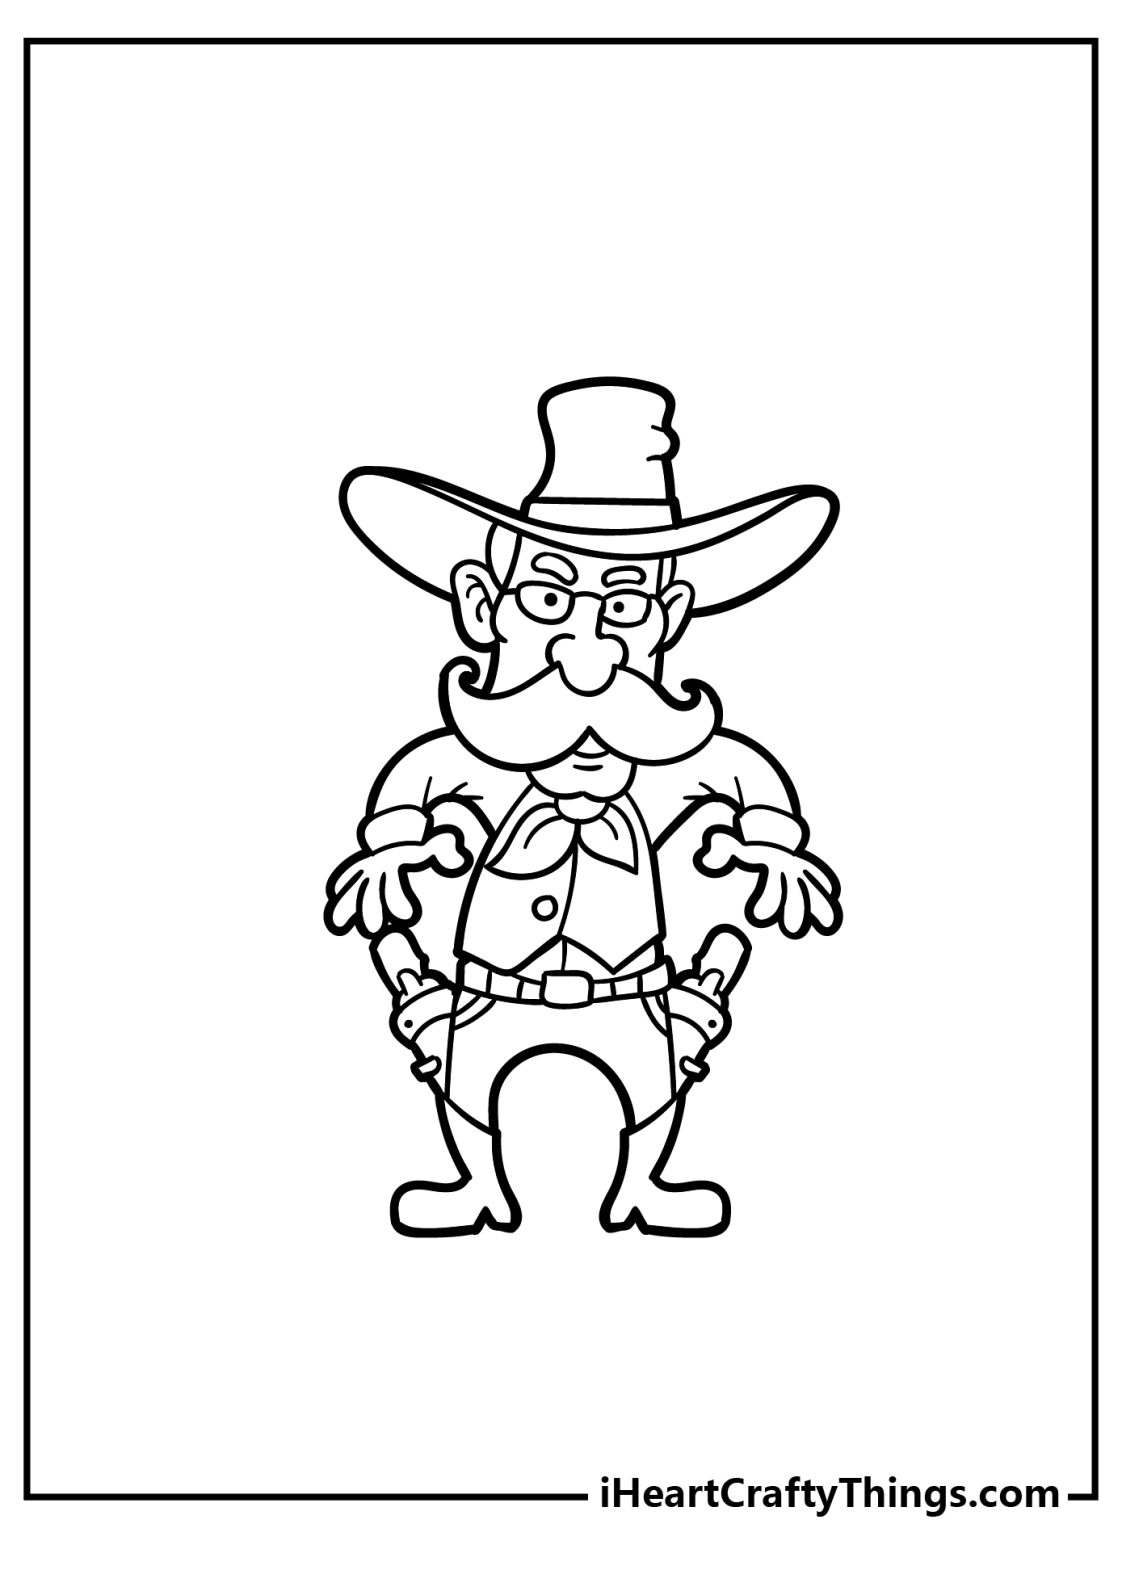 Cowboy Coloring Pages (100% Free Printables)